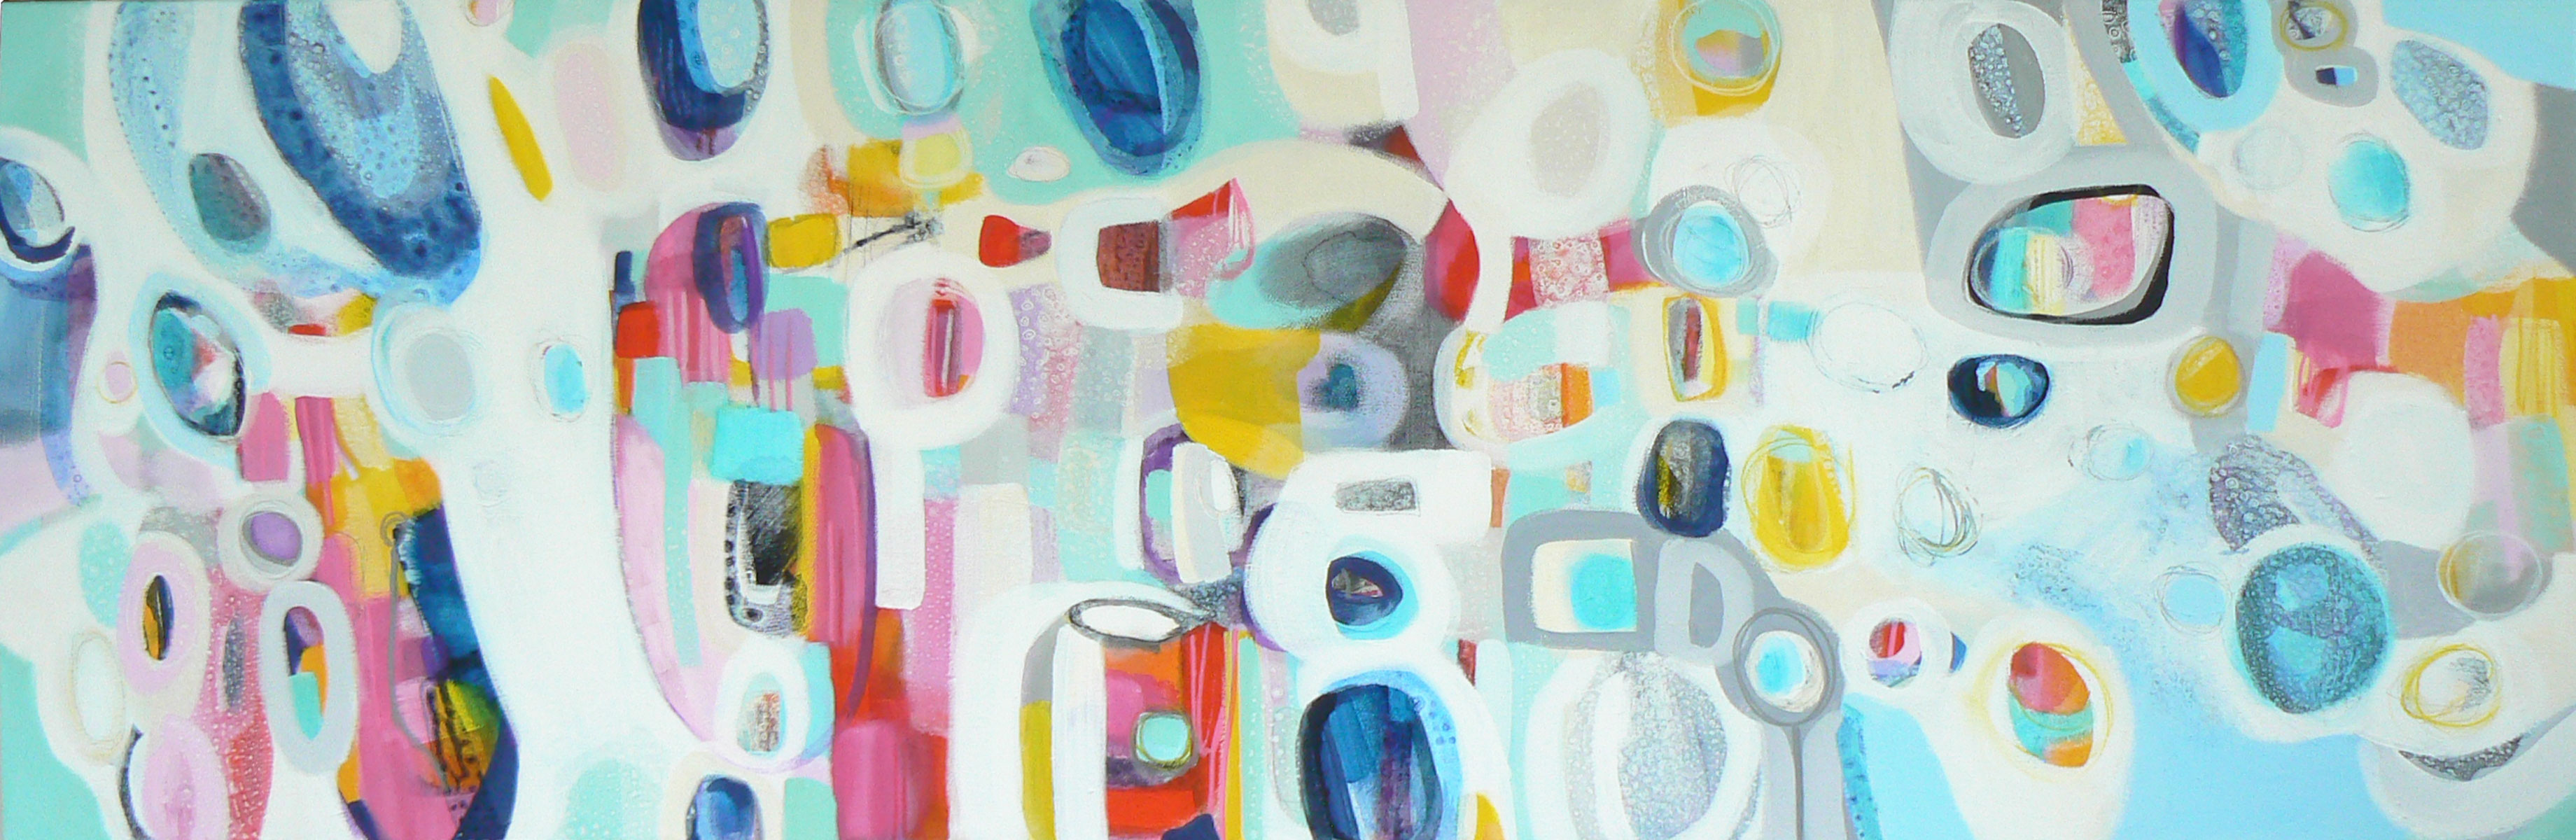 I'm forever blowing bubbles, 2016 Acrylic painting by Carolynne Coulson